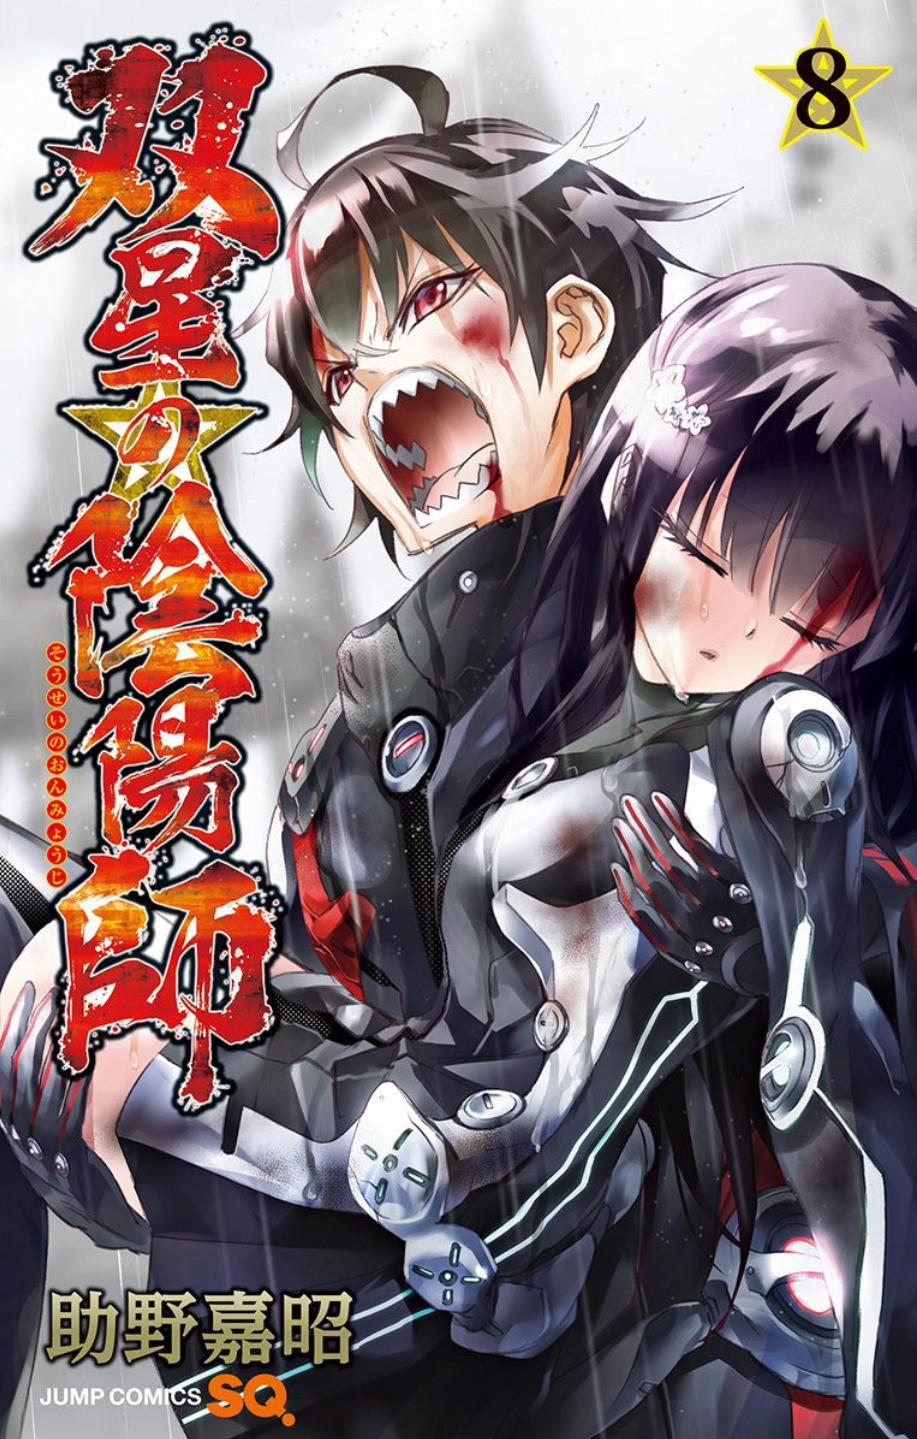 Twin Star Exorcists #22